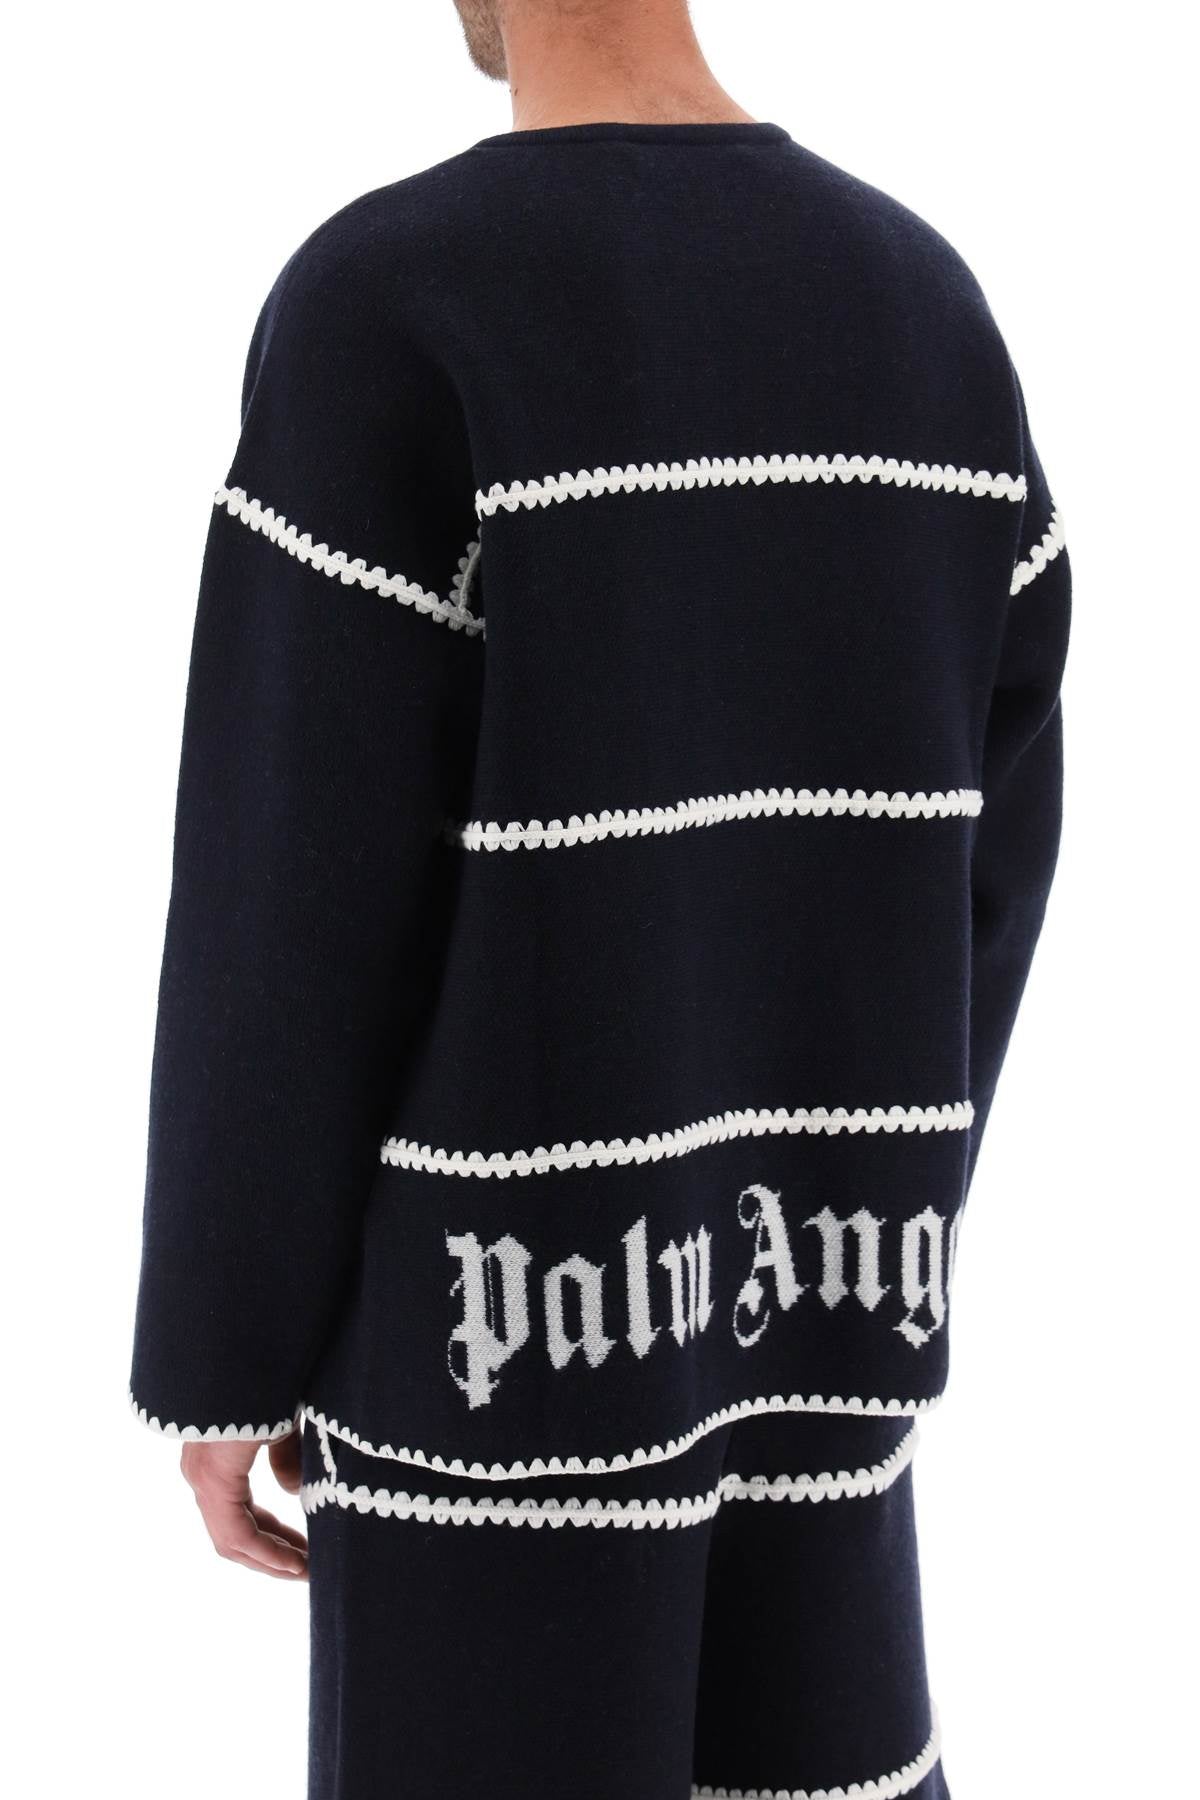 PALM ANGELS Blue Knit Pullover with Contrast Embroideries for Men - FW24 Collection